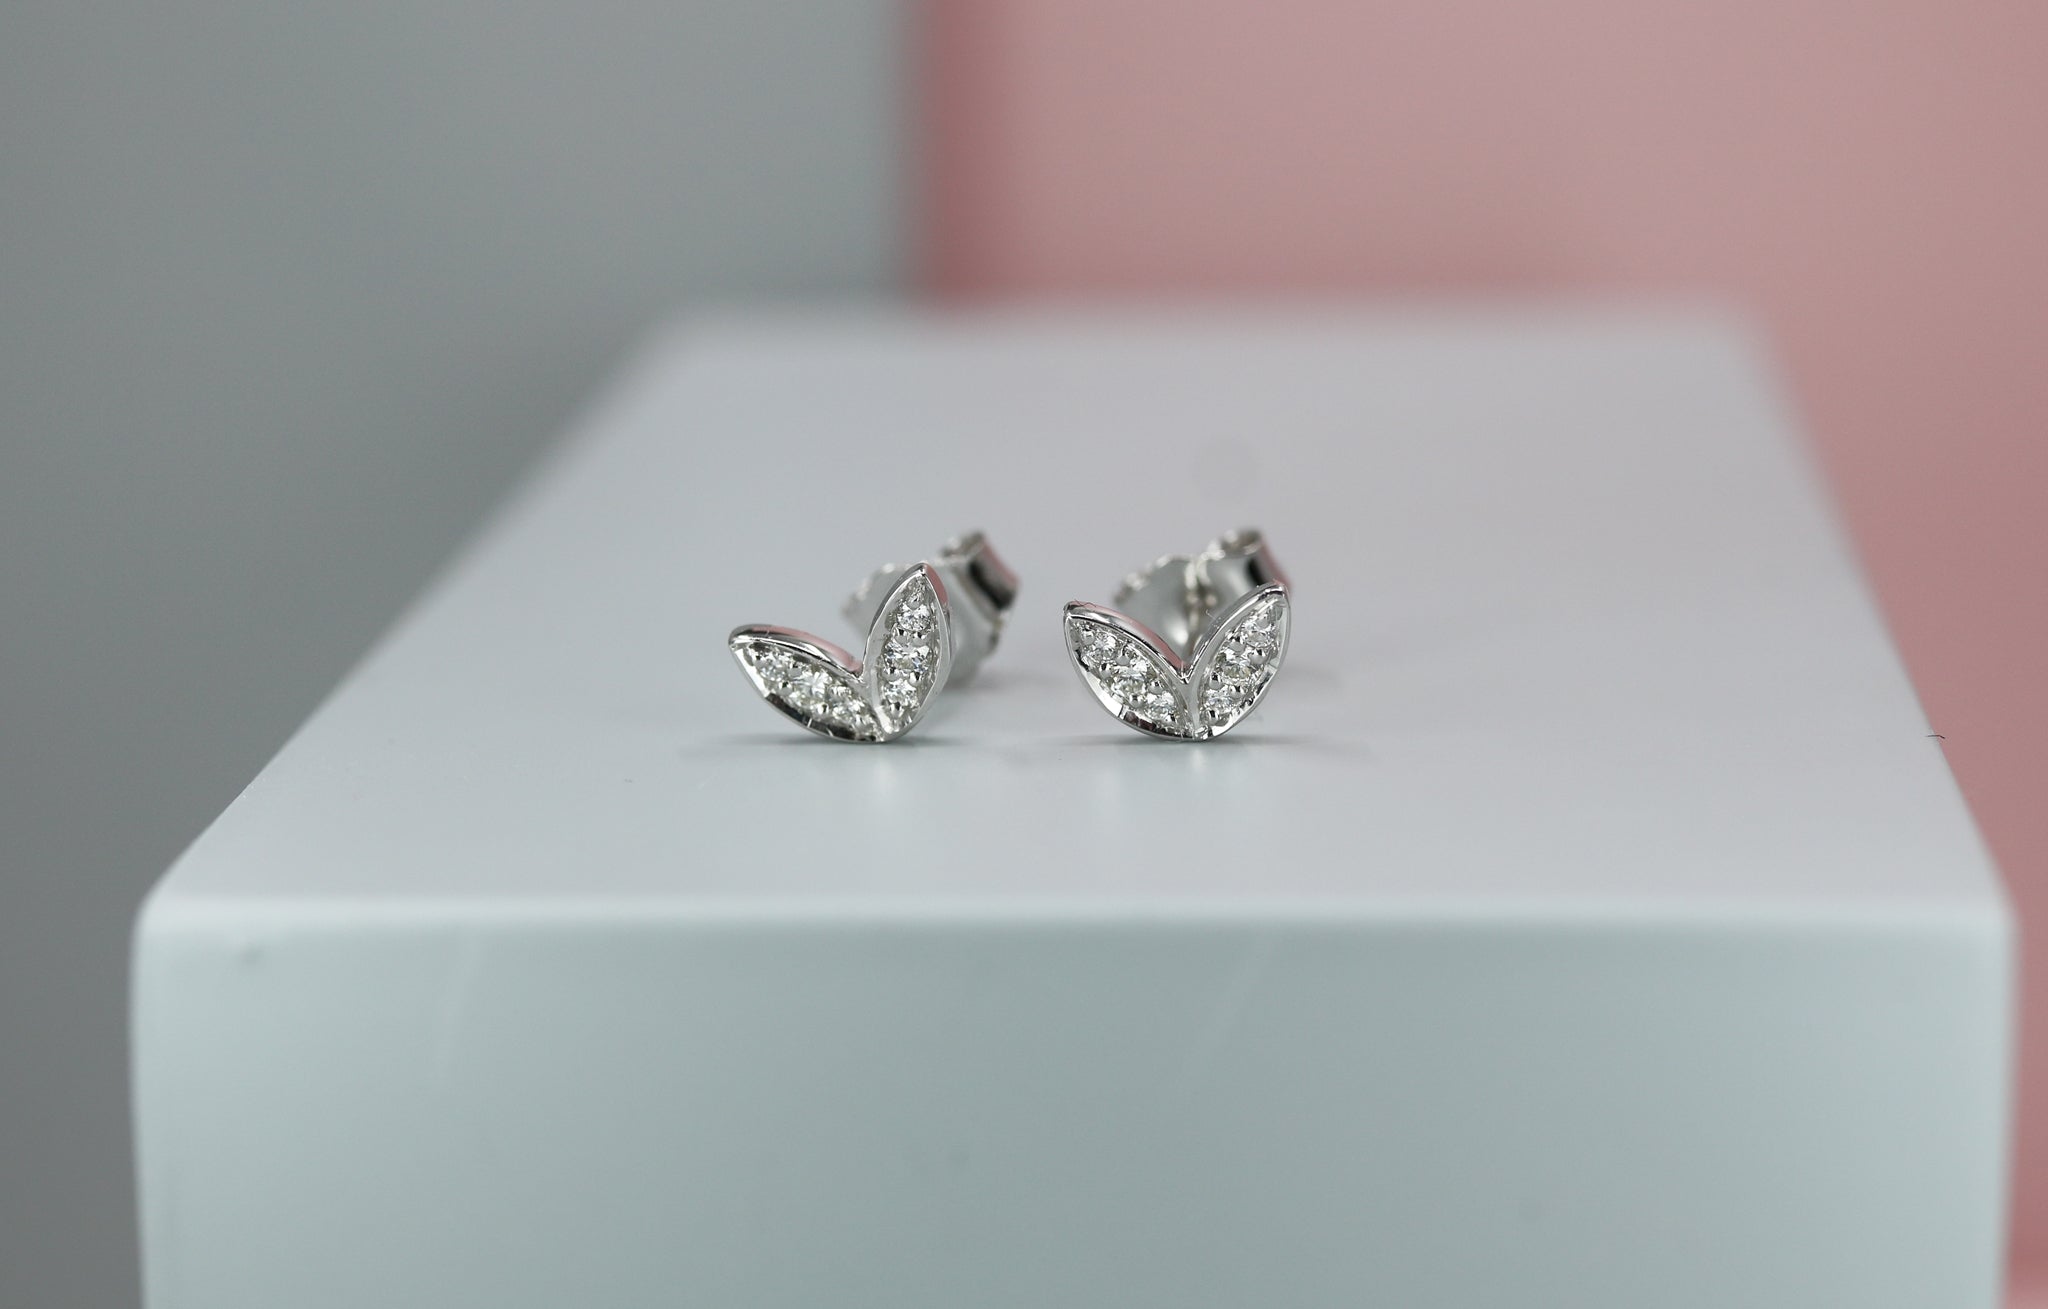 9ct White Gold & Diamond Winged Studs - Hallmark Jewellers Formby & The Jewellers Bench Widnes